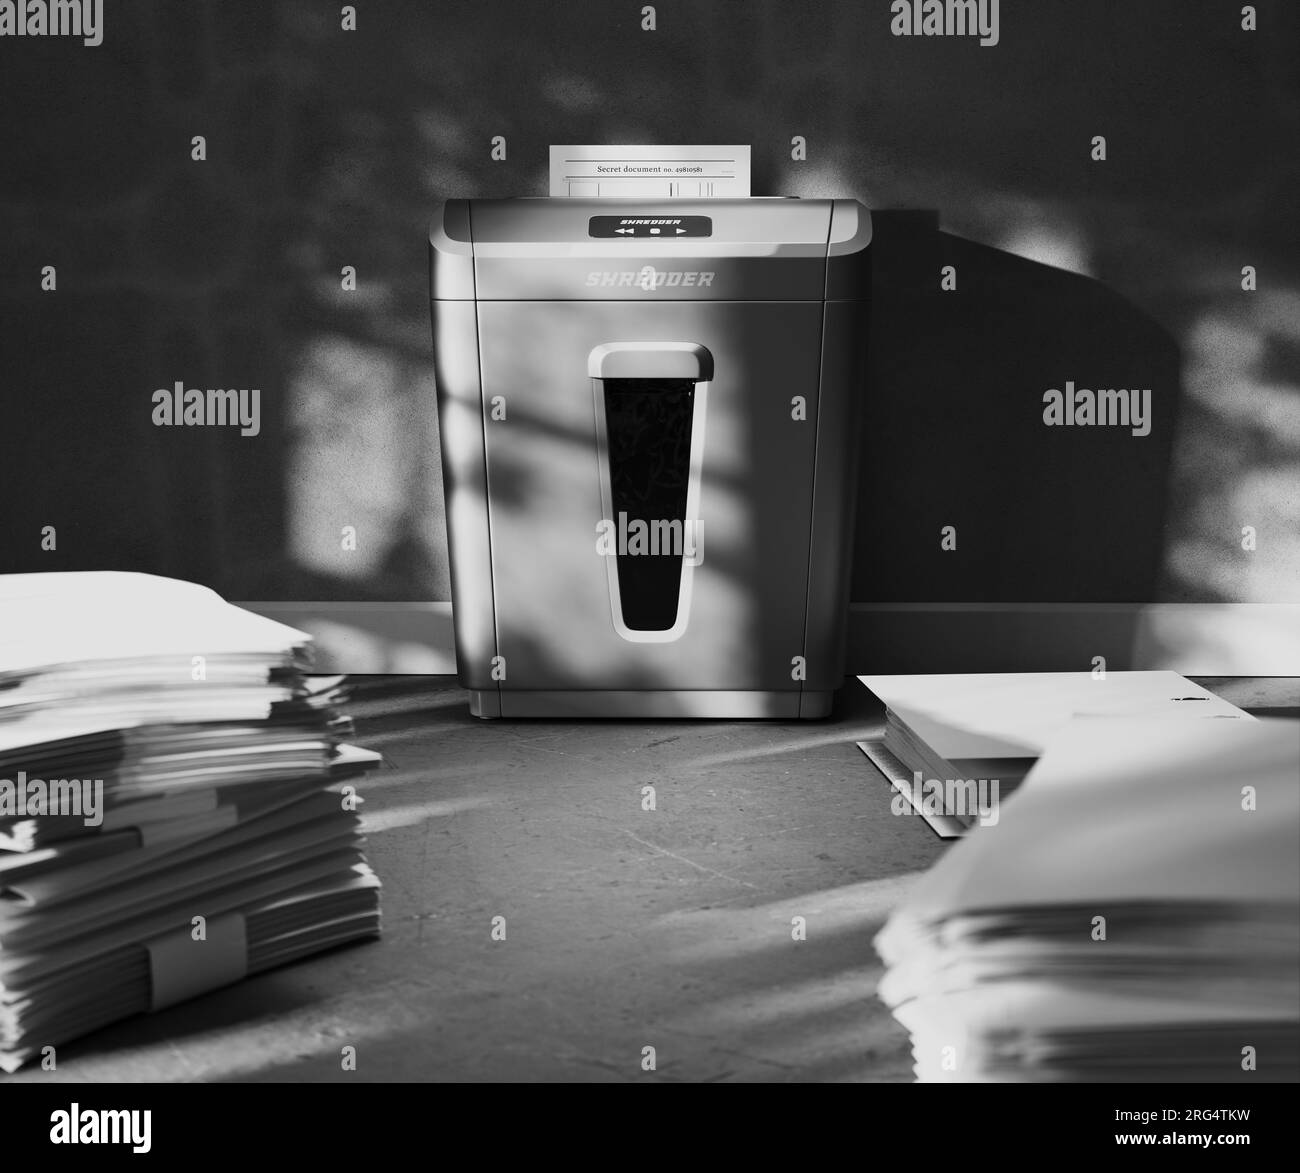 Shredder machine for documents and stacks of paper in daylight room. Office Stock Photo